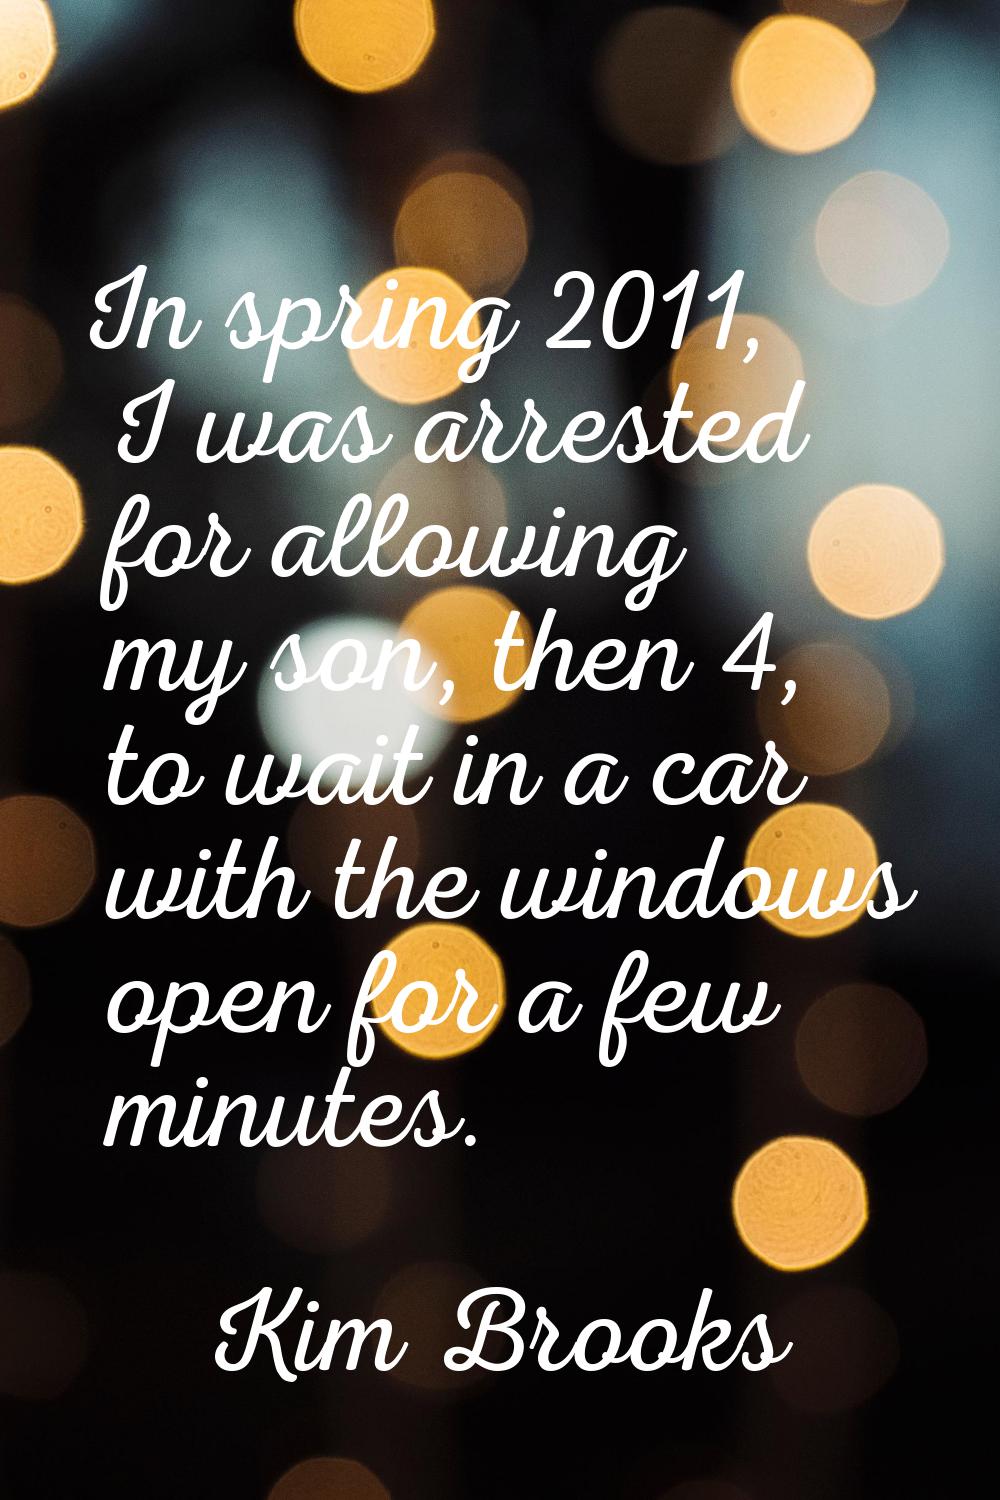 In spring 2011, I was arrested for allowing my son, then 4, to wait in a car with the windows open 